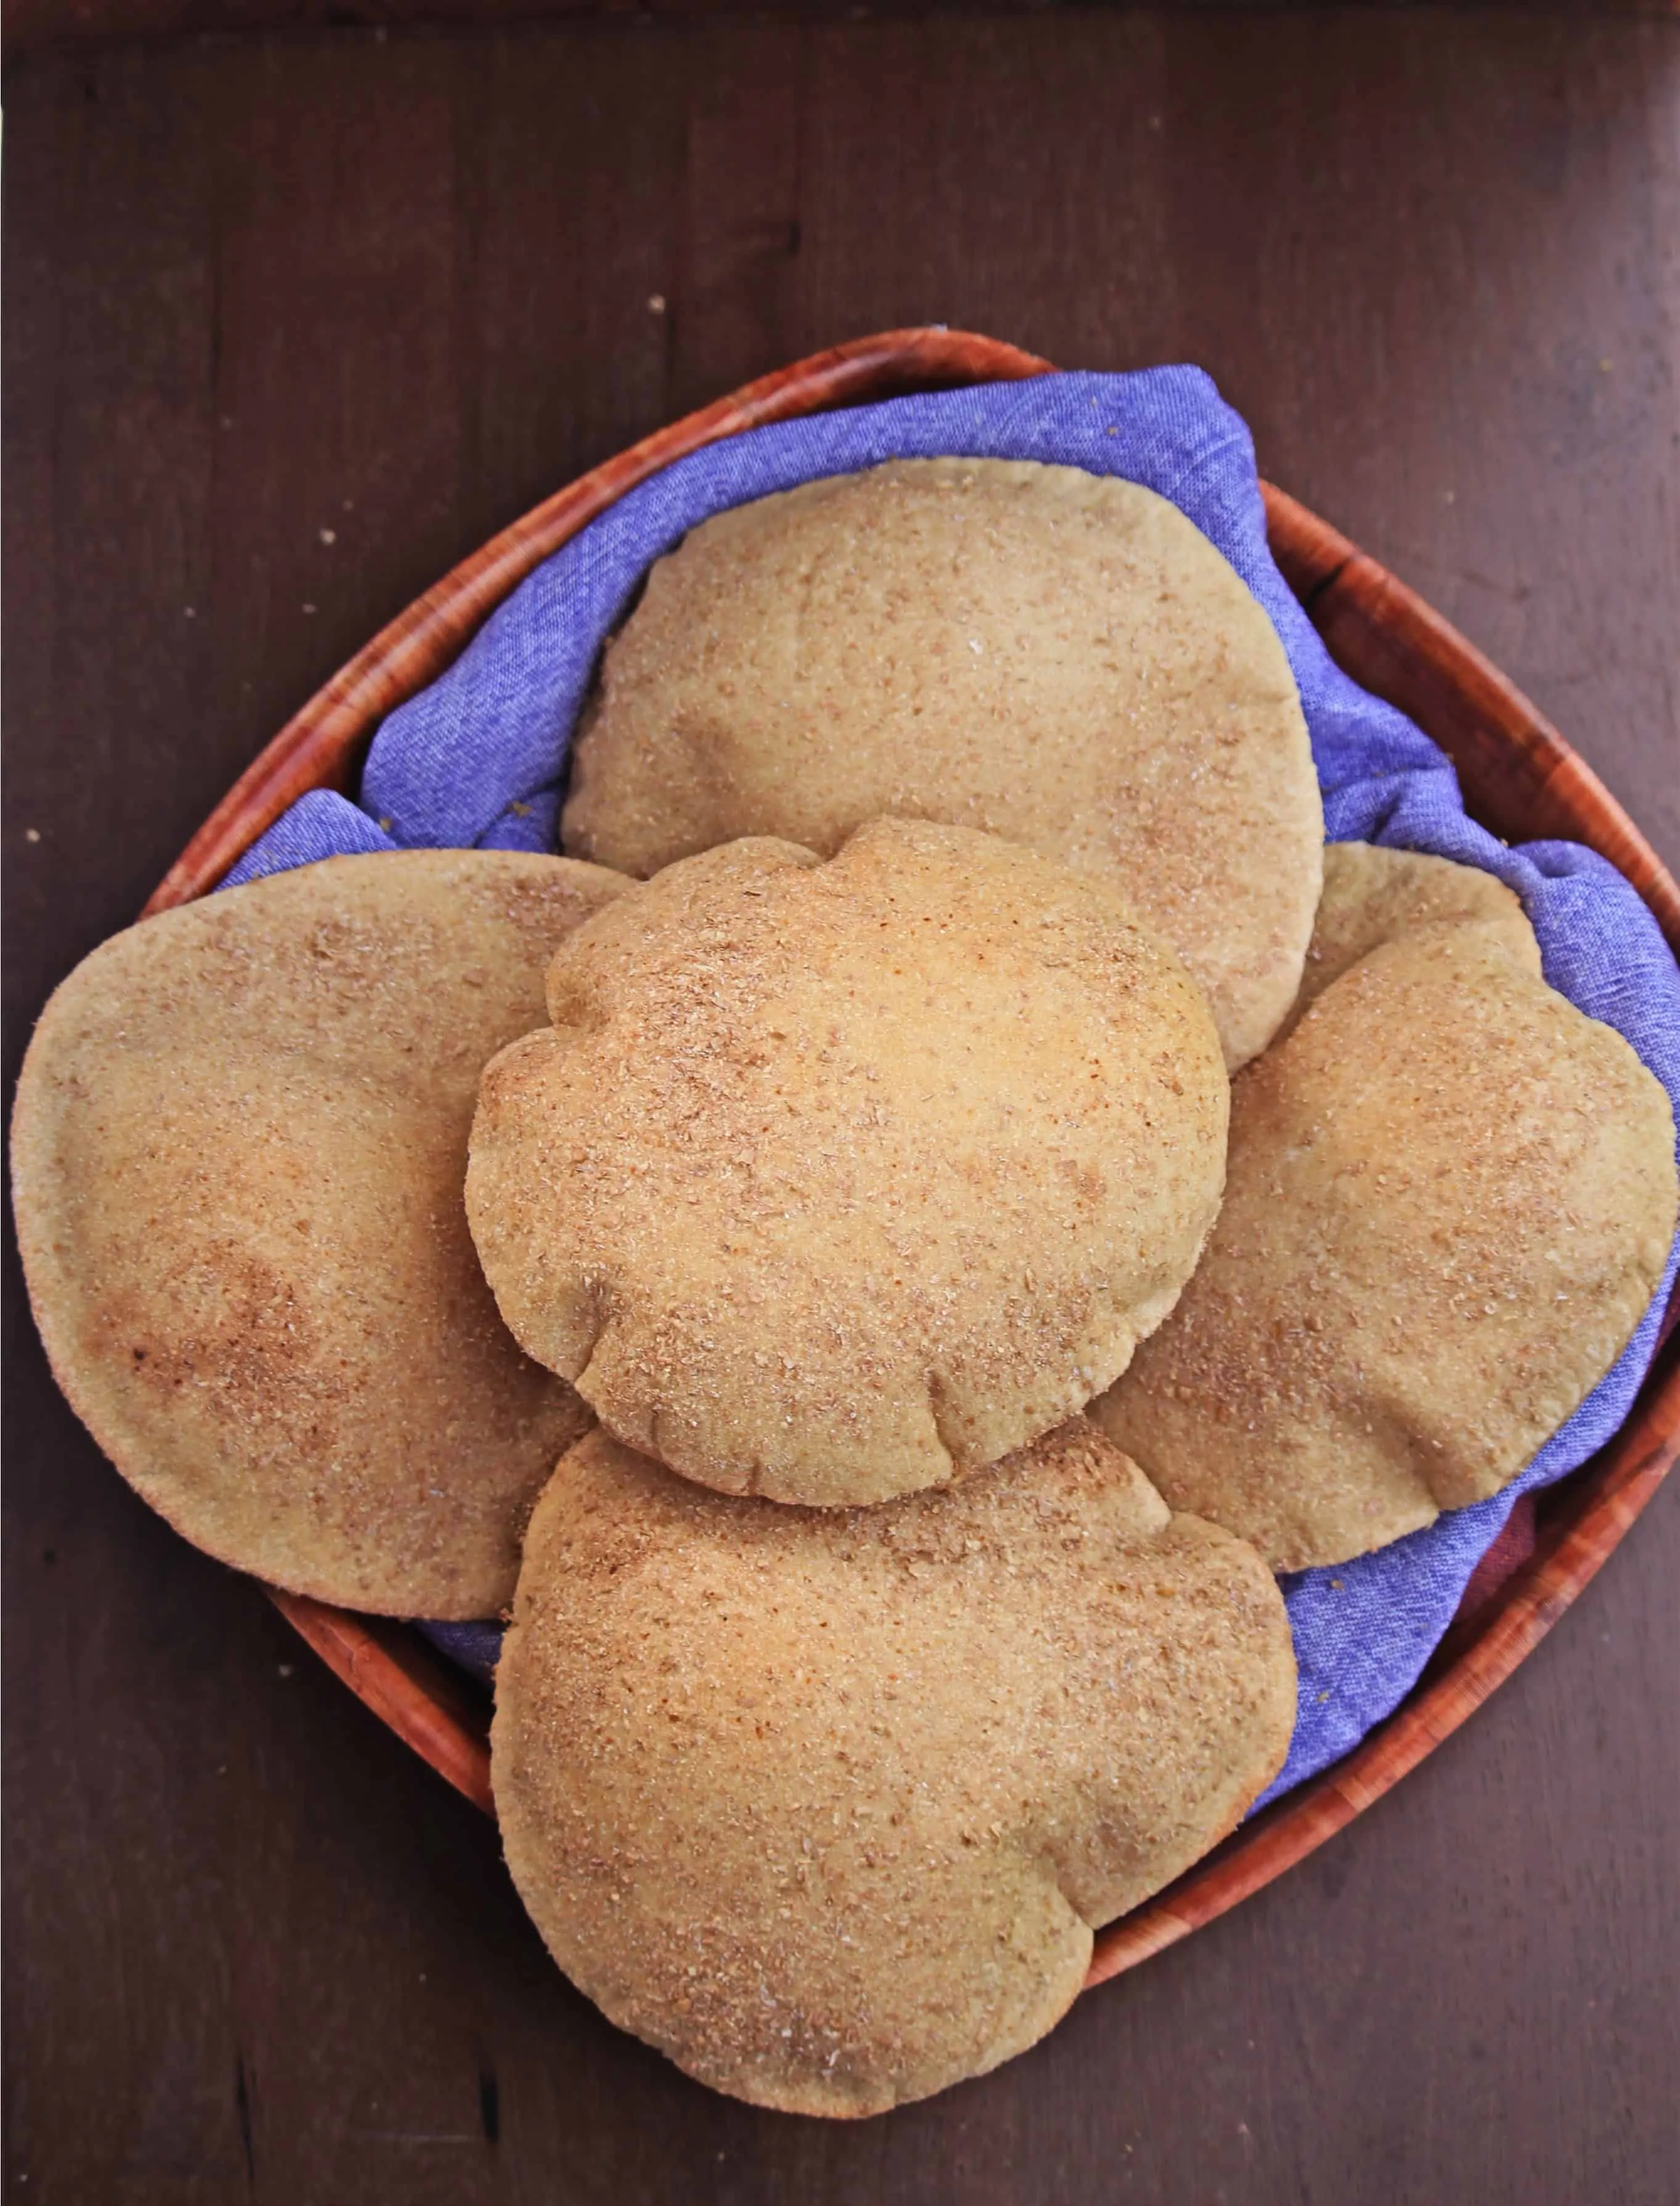 5 aish baladi arranged in a bowl lined with blue towel